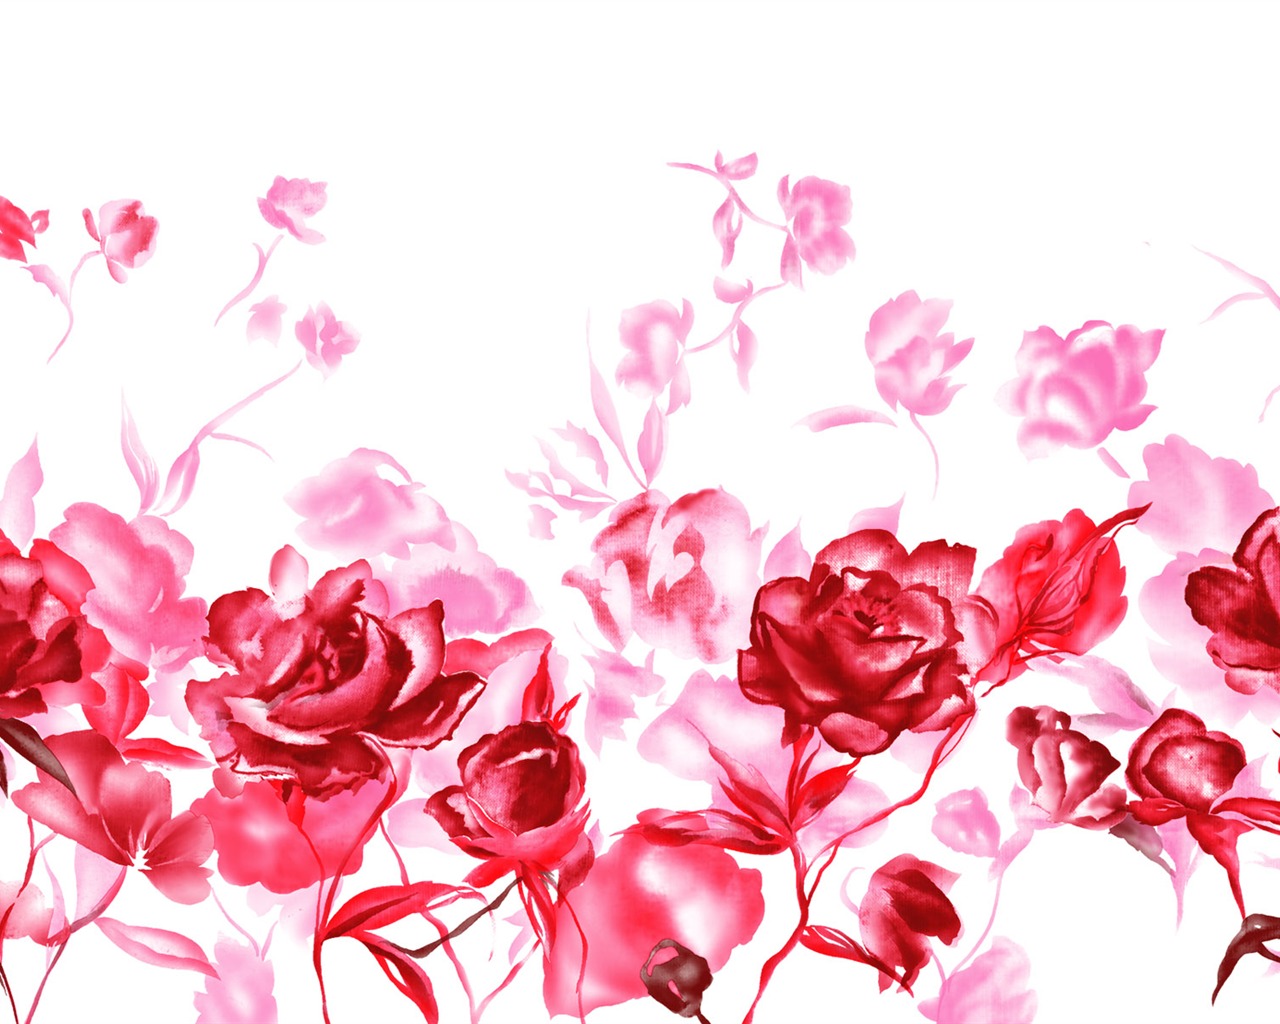 Valentine's Day Love Theme Wallpapers (3) #15 - 1280x1024